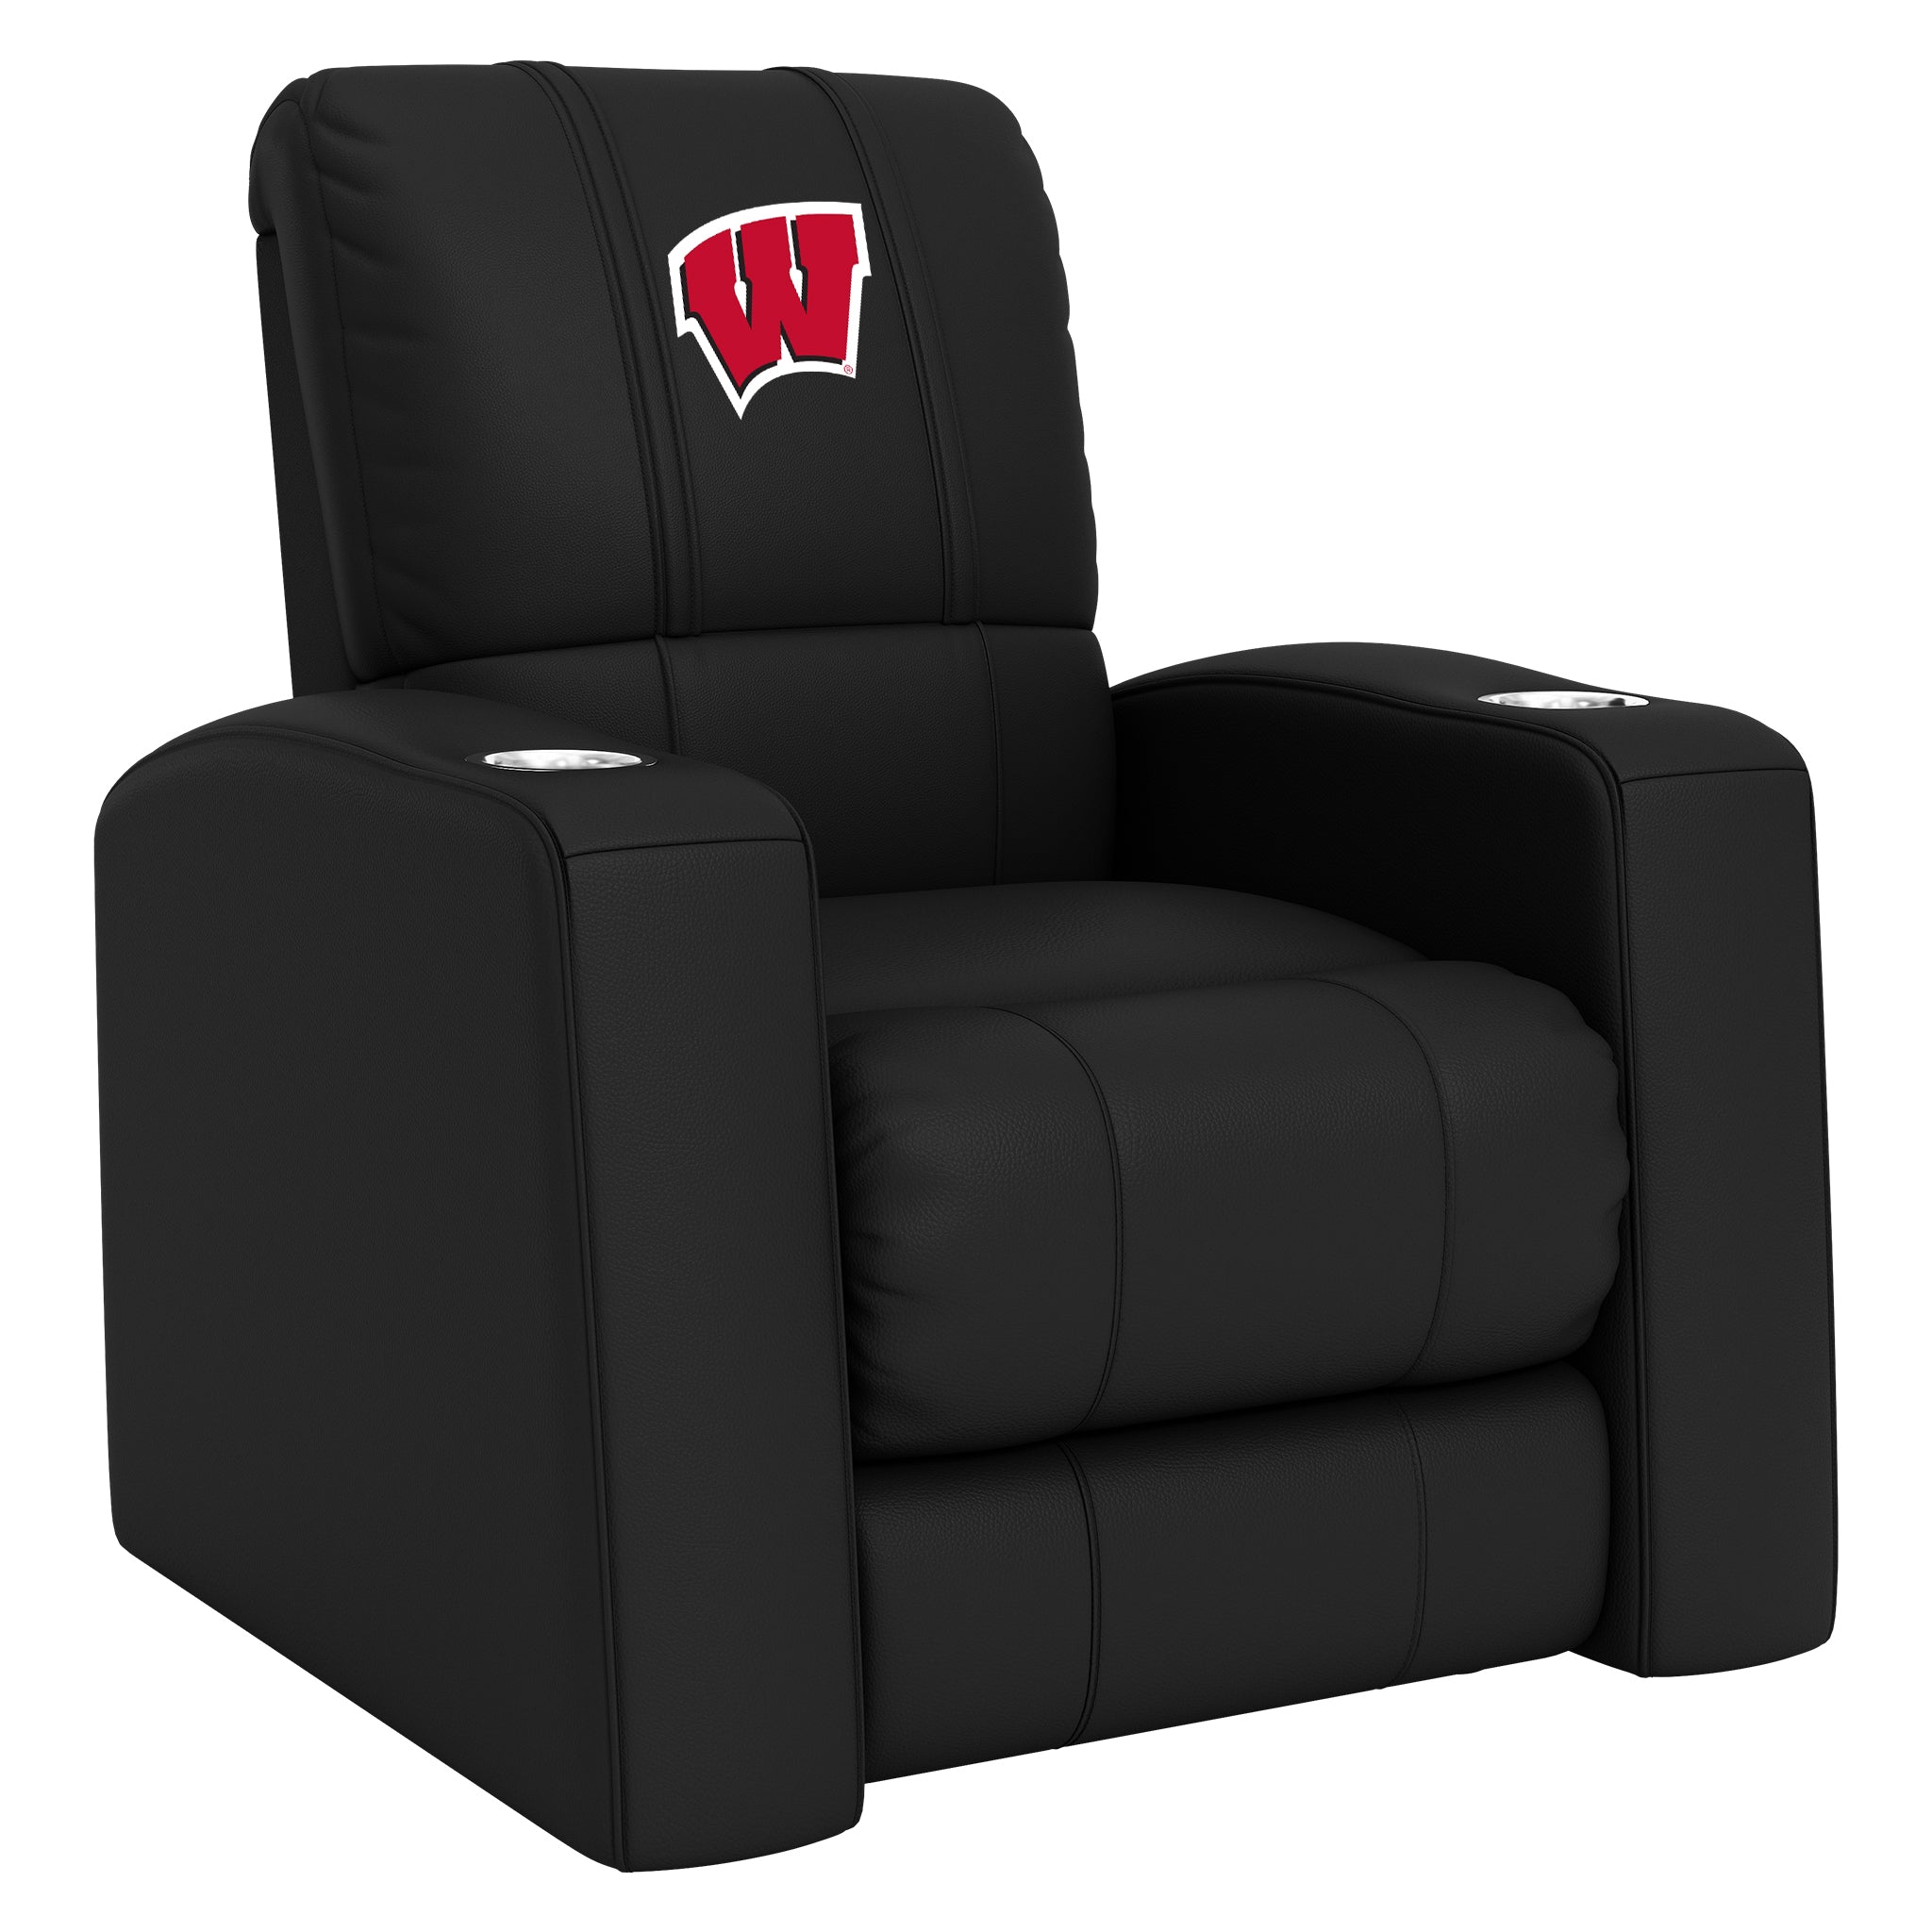 Wisconsin Badgers Home Theater Recliner with Wisconsin Badgers Logo